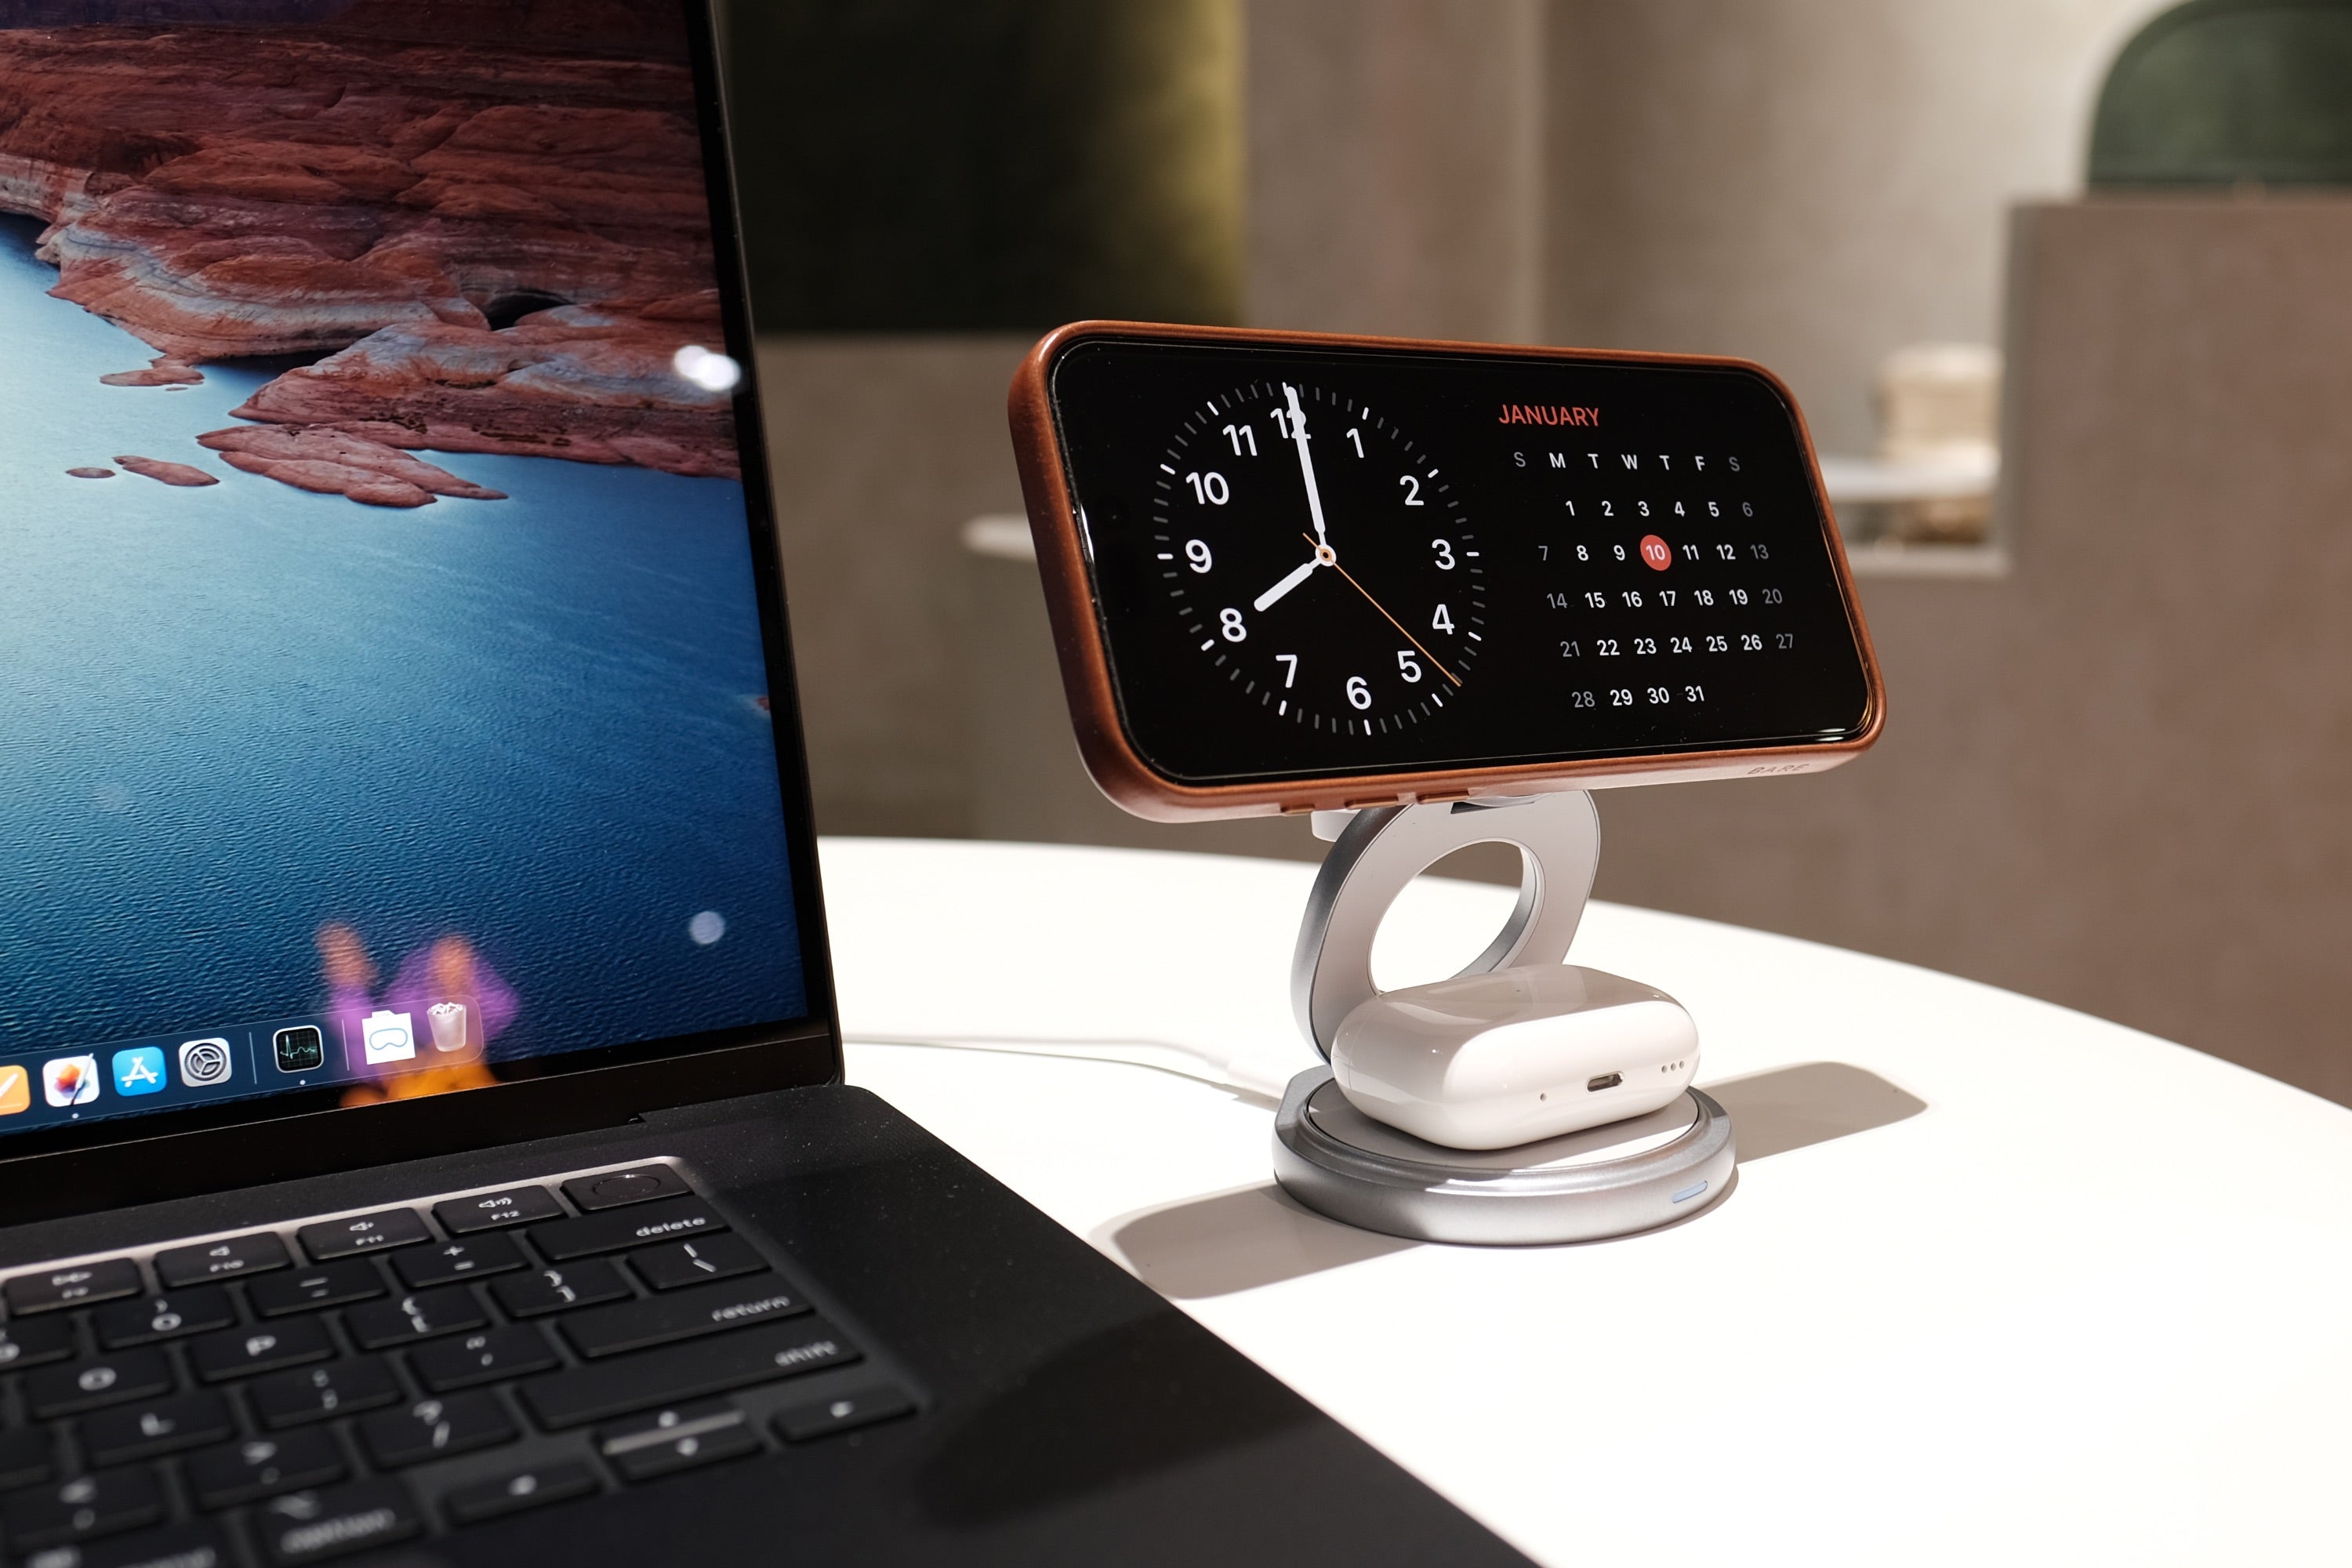 The Nexus 3-in-1 Wireless Charger - Can Be Powered by Macbook